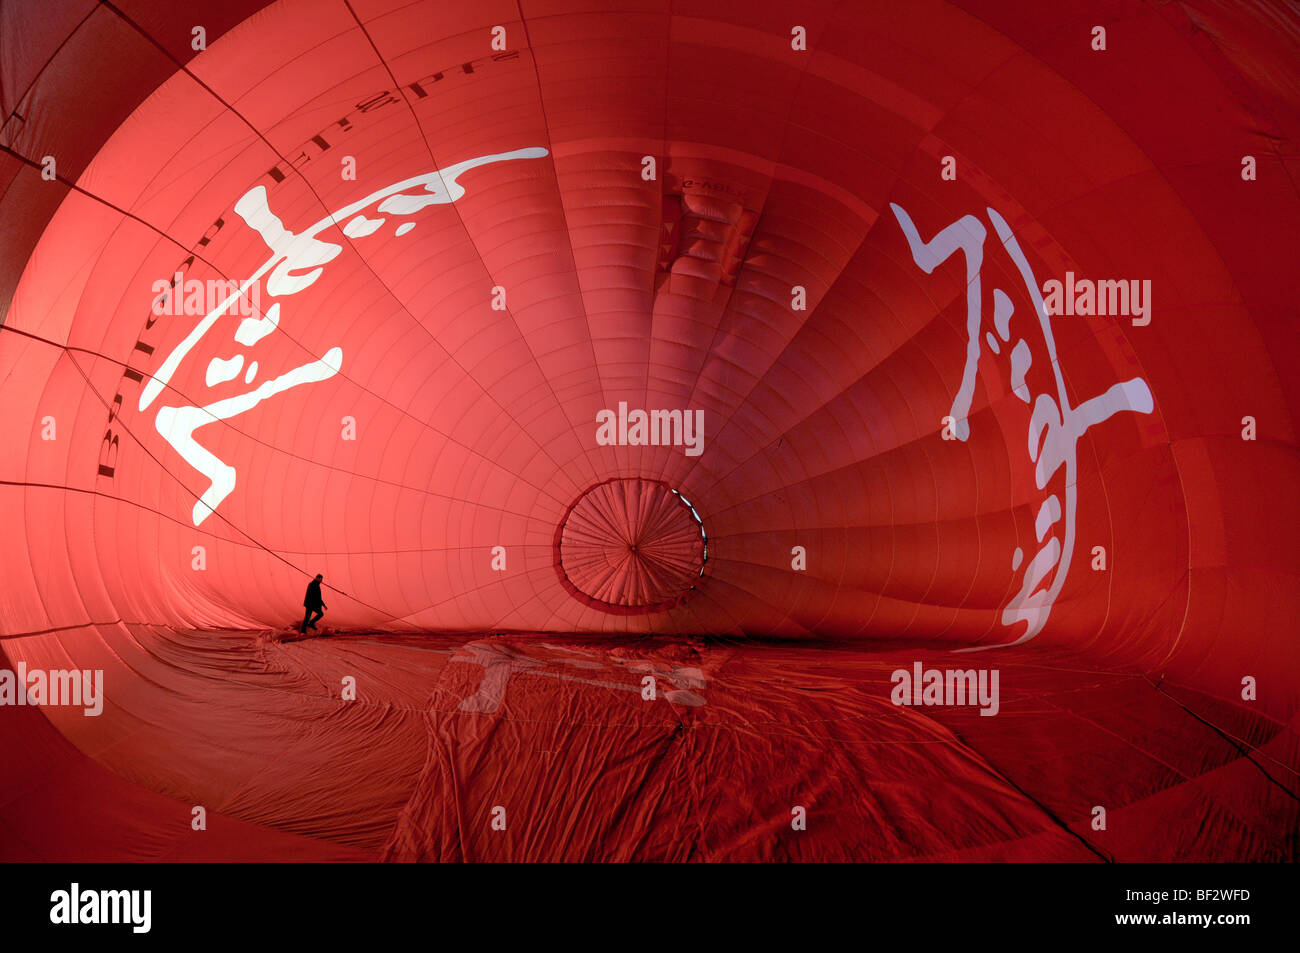 Wide angle view looking inside a hot air balloon as it is being inflated with the balloon pilot walking inside Stock Photo